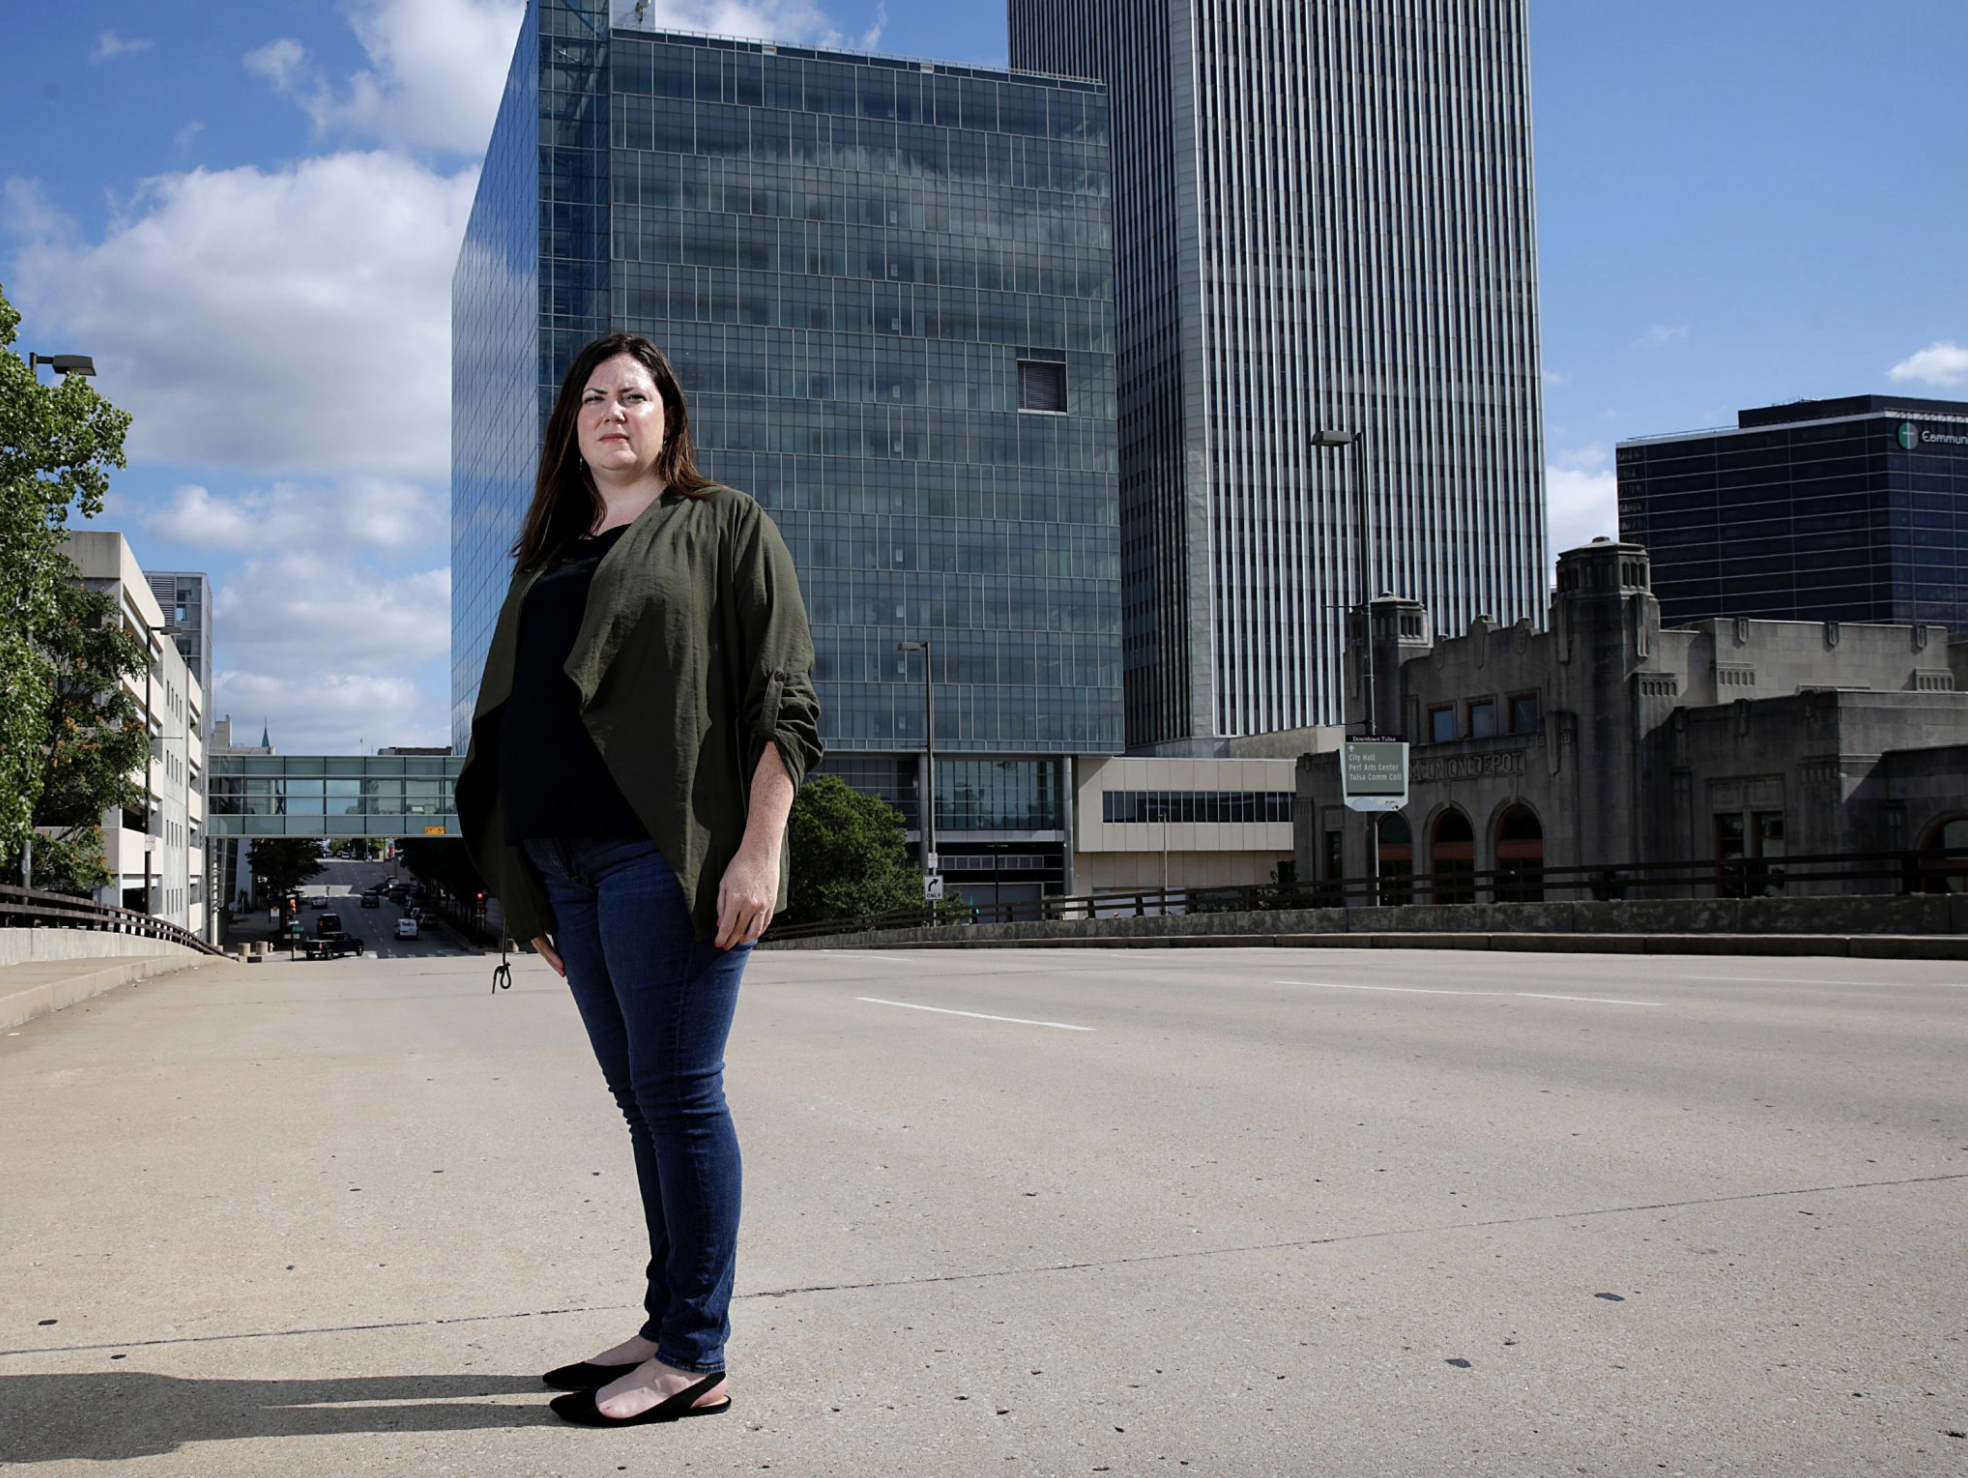 Becky Gligo, the housing policy director for the City of Tulsa, Oklahoma, leads efforts to reduce evictions in a city ranked the 11th-highest evictor in the nation by Princeton University’s Eviction Lab. Image by Mike Simons. United States, 2020.
